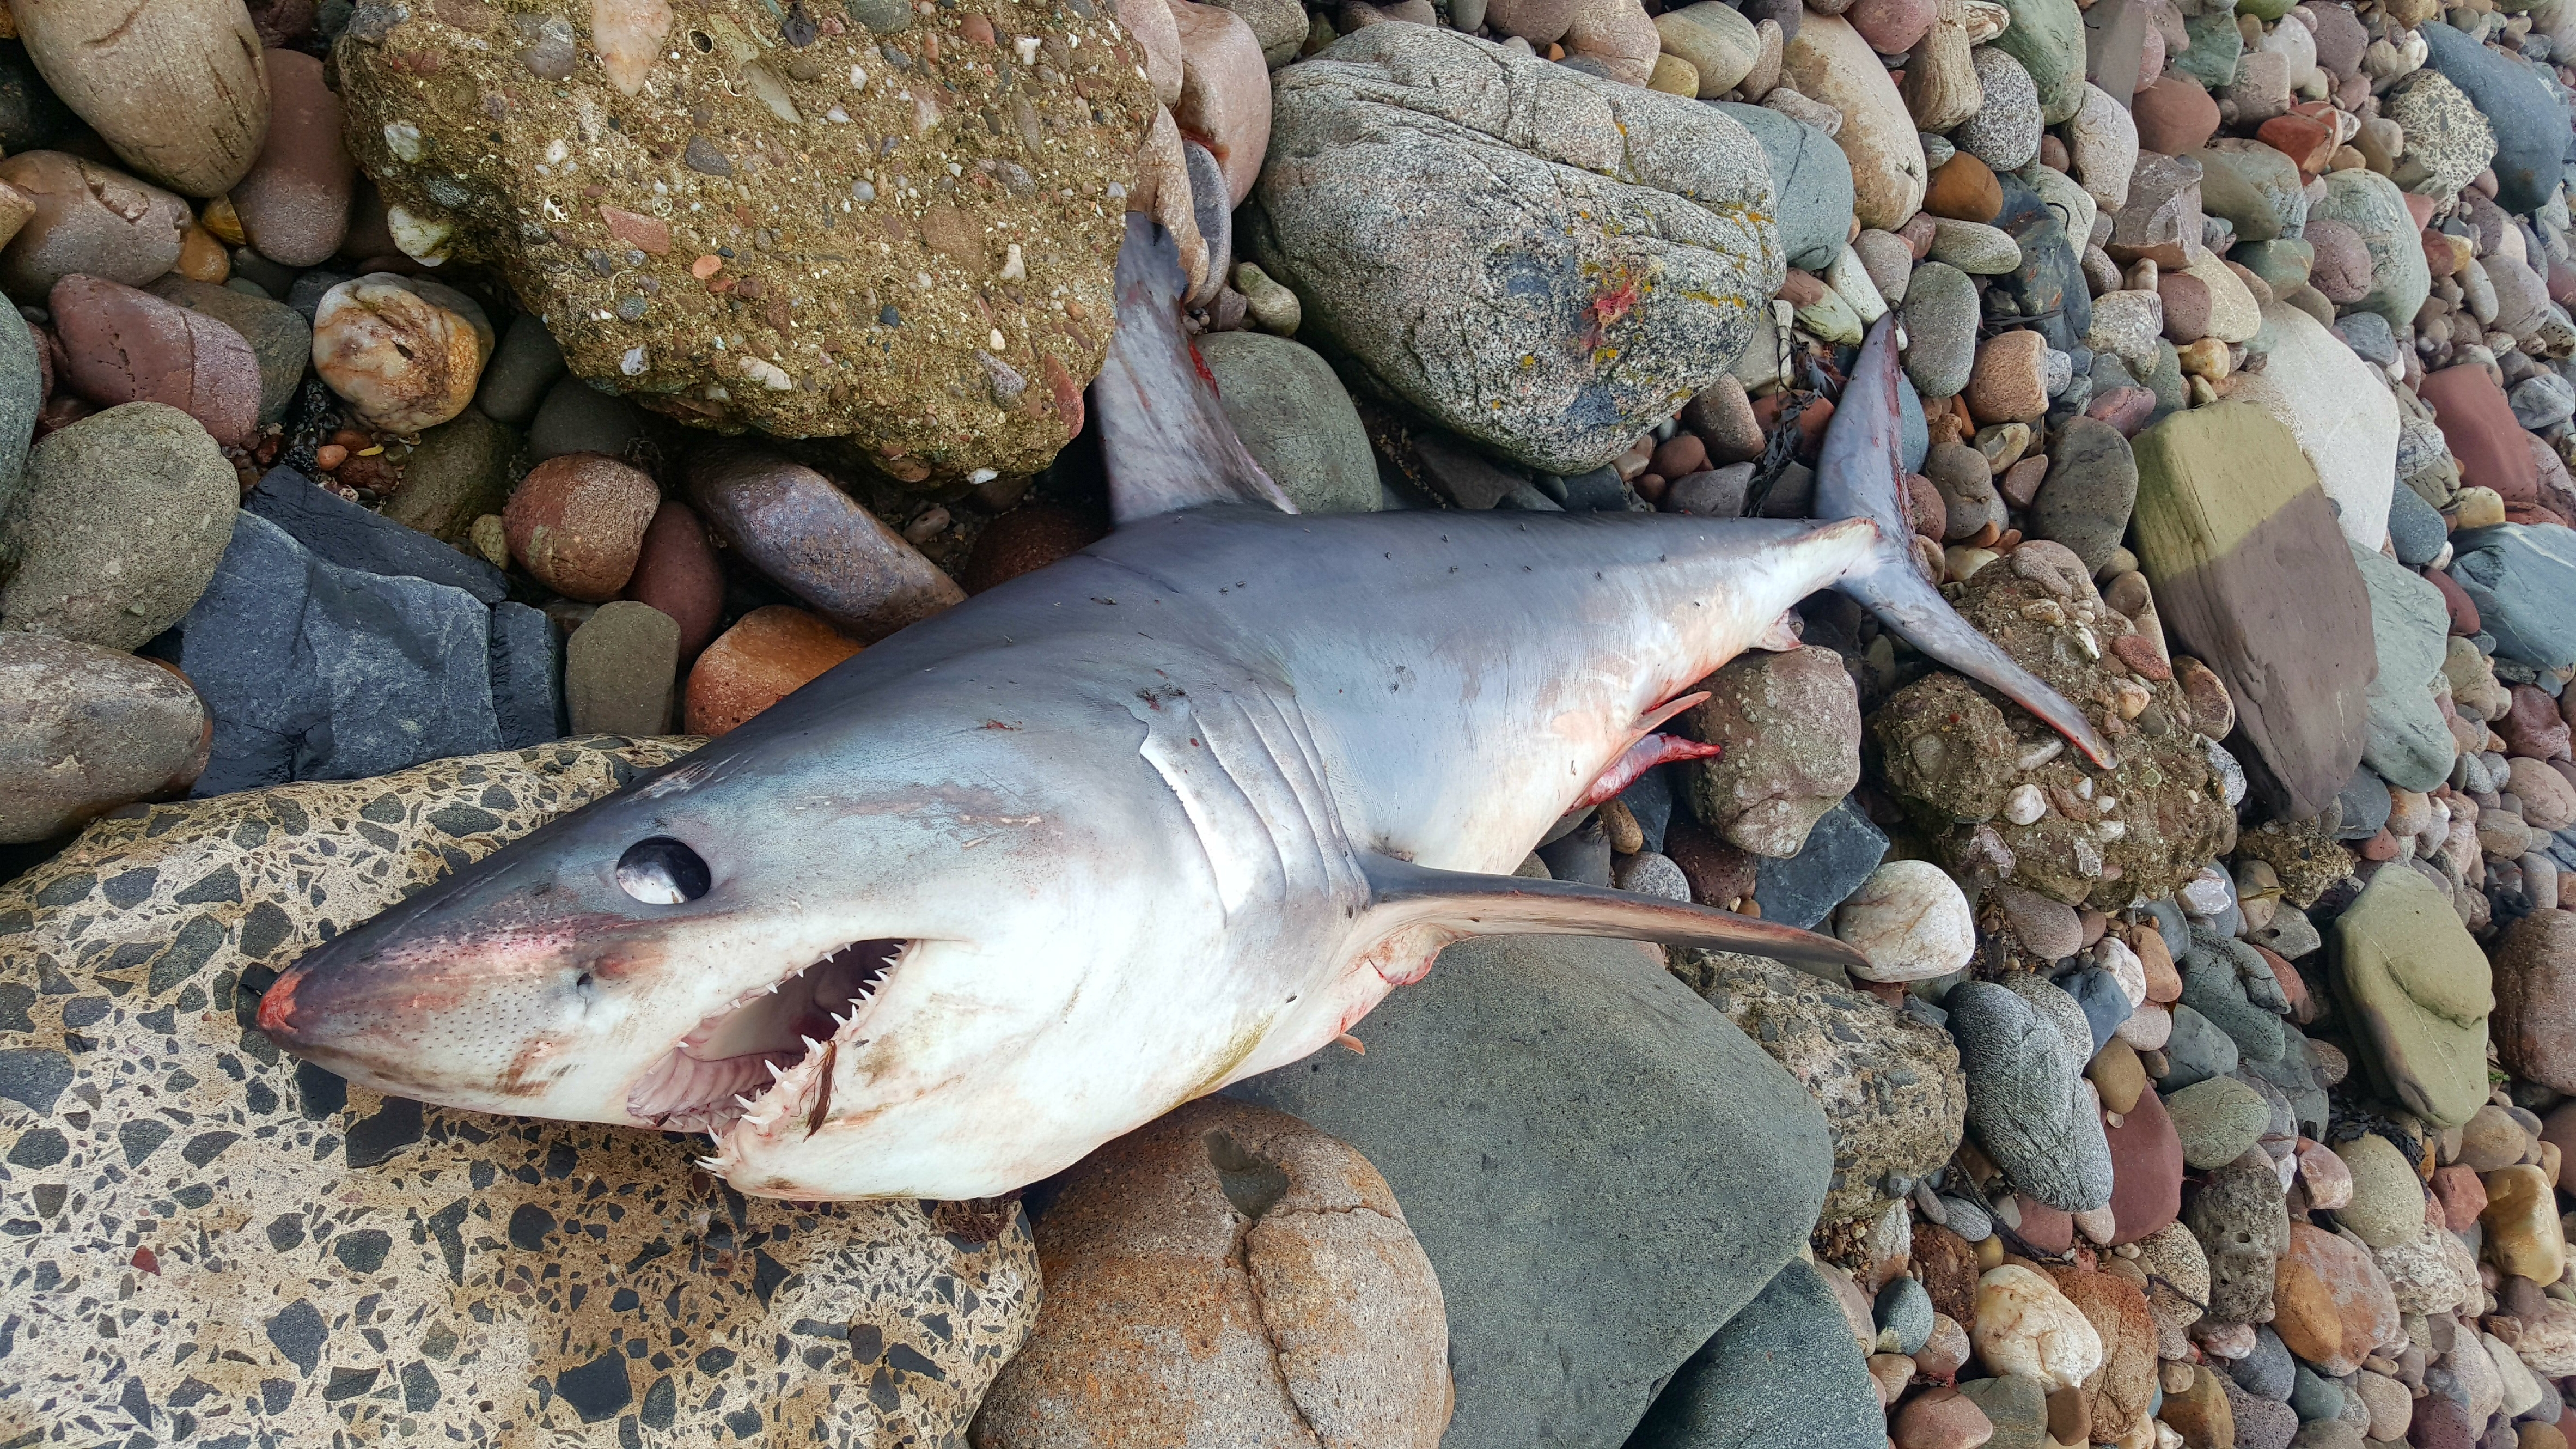 The shark washed up on Arbroath beach. (Picture: Laura Laws).